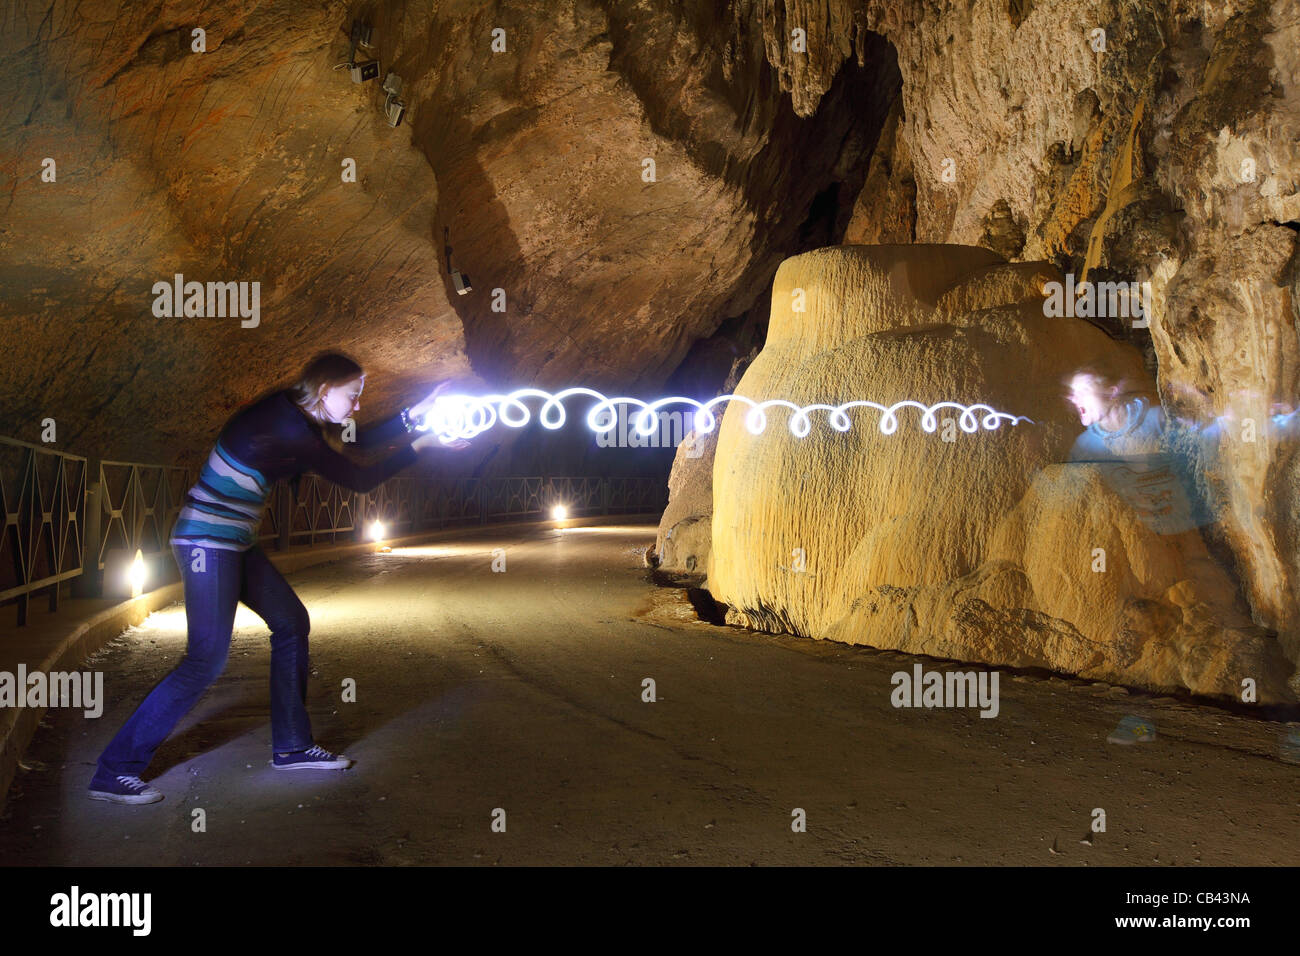 playing with long exposure photography. Photos inside a cave Stock Photo